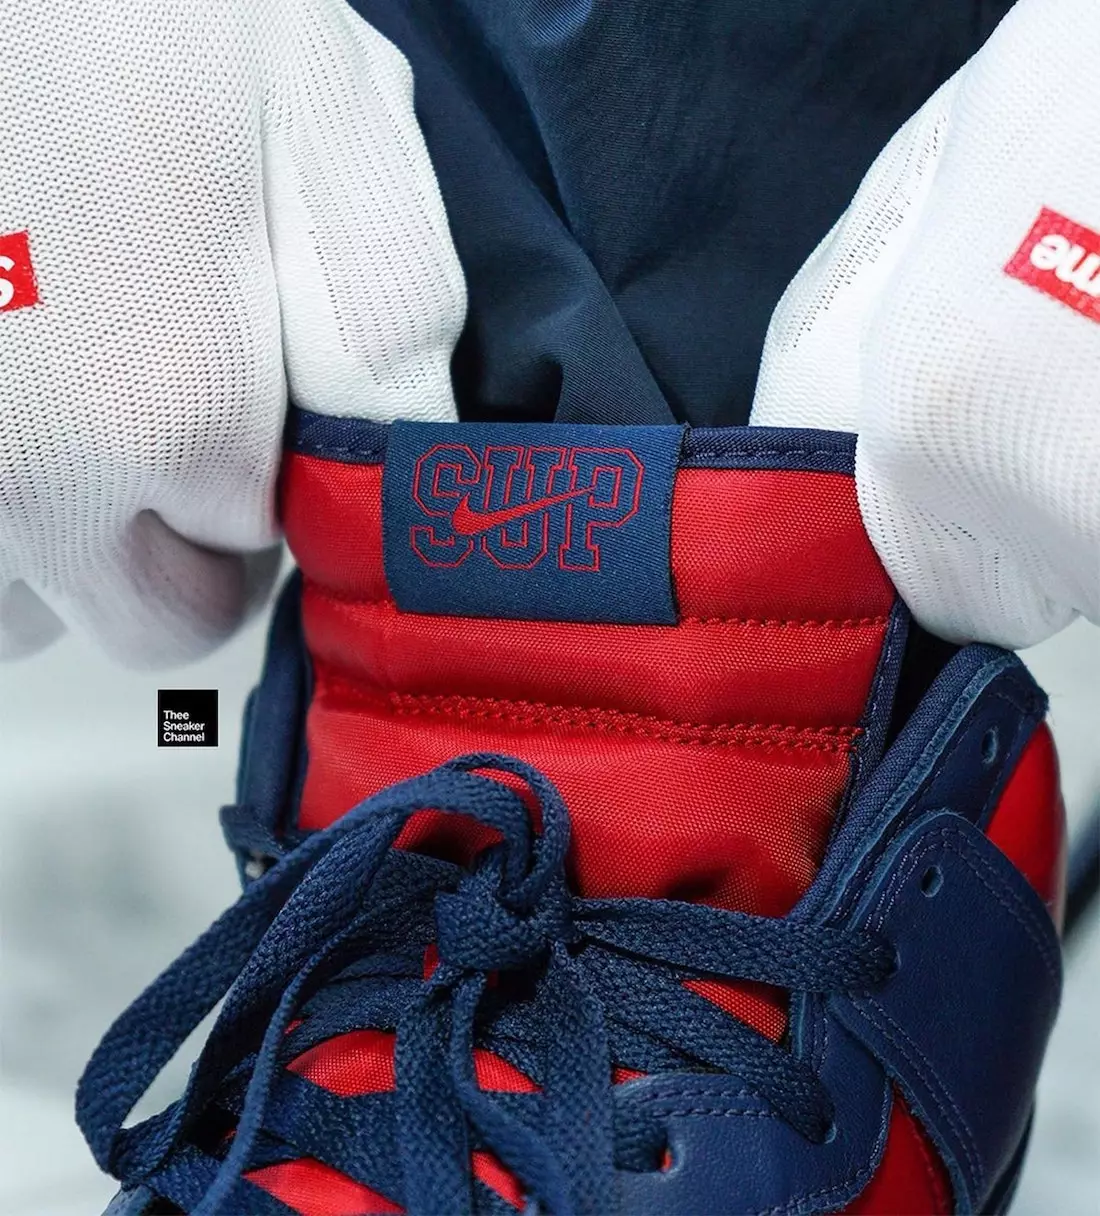 Върховен Nike SB Dunk High By Any Means Red Navy On-Feet